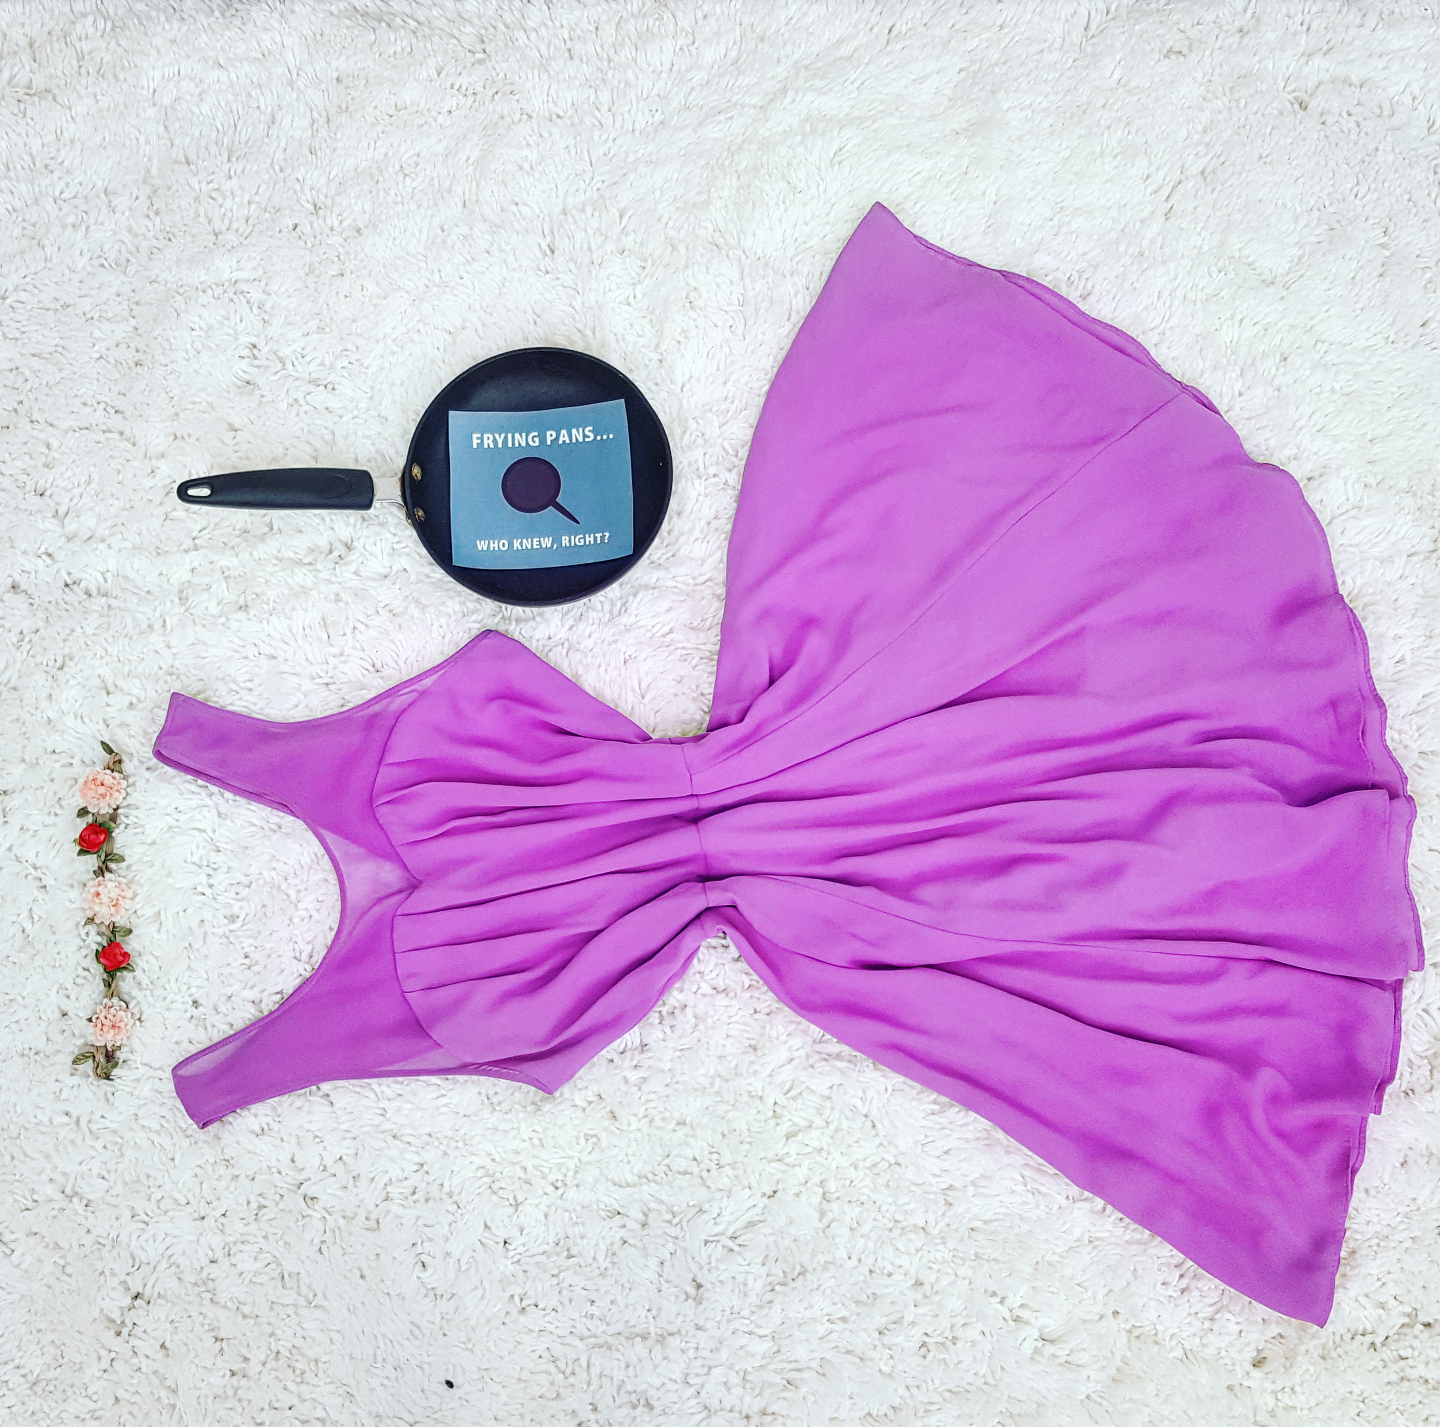 Thrift Store Cosplay Day 7 Rapunzel from Disney's Tangled fashion blog post flat lay